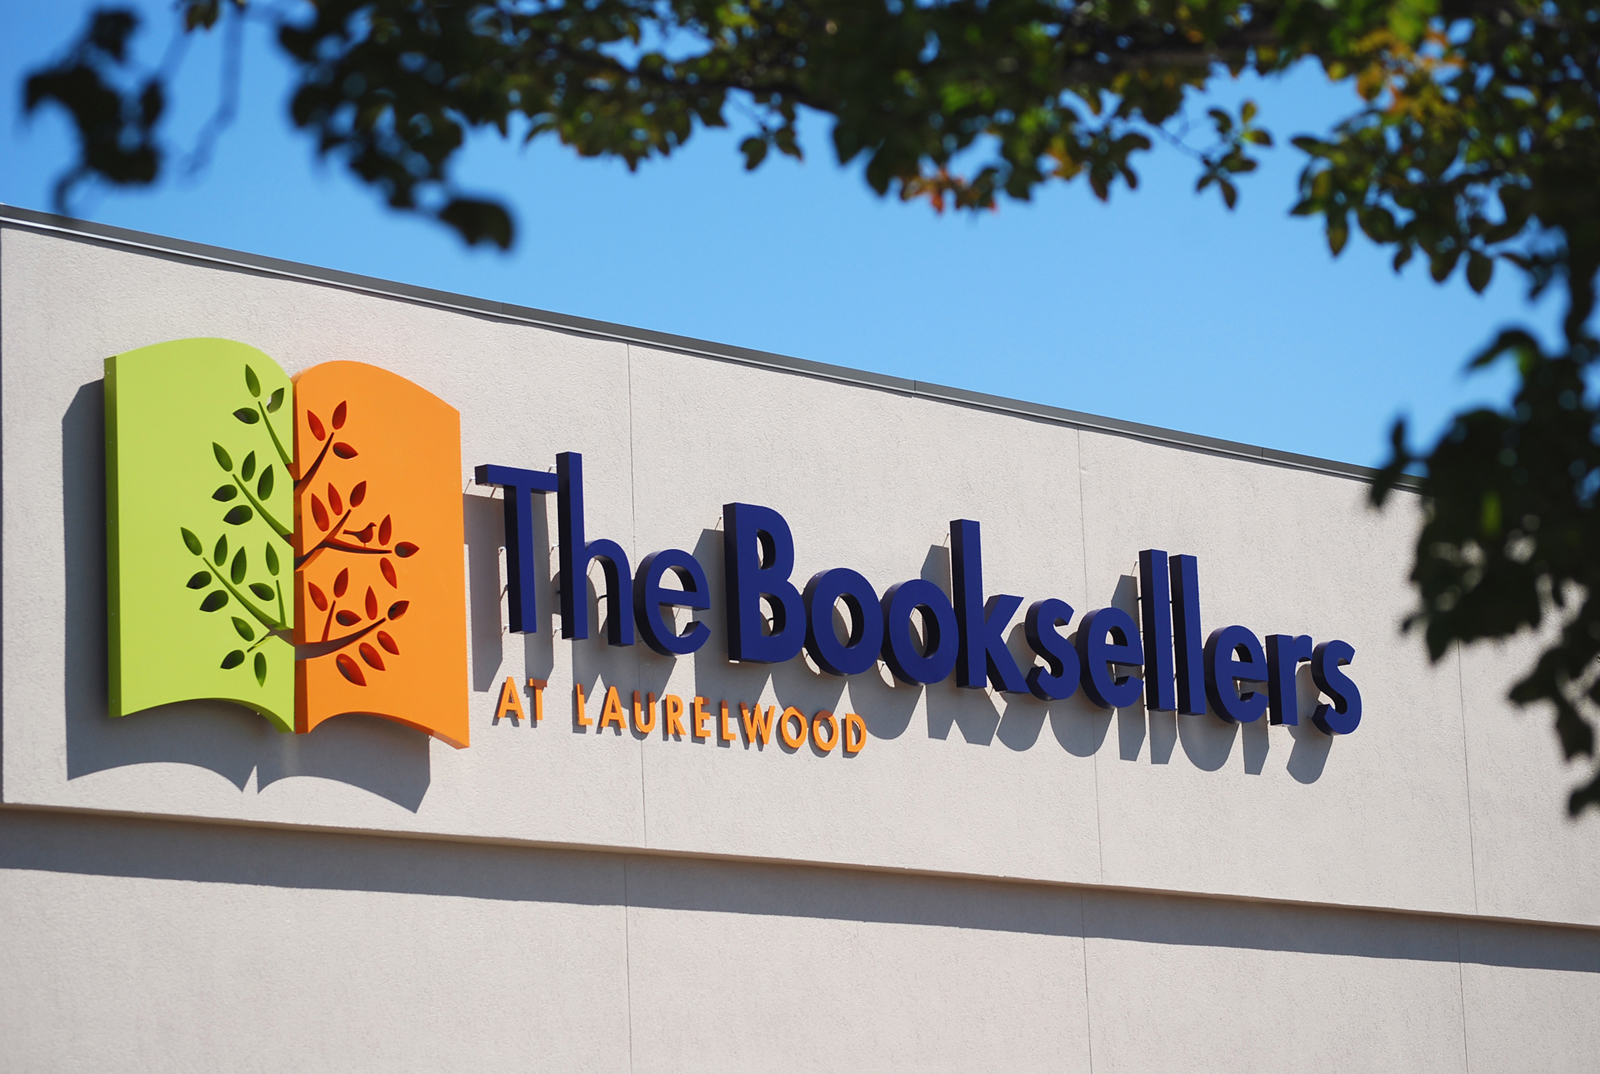  The Booksellers at Laurelwood exterior signage  Creative and design by Chuck Mitchell  Laurelwood Center Memphis, Tennessee  Sign fabrication and installation by Frank Balton Sign Company 